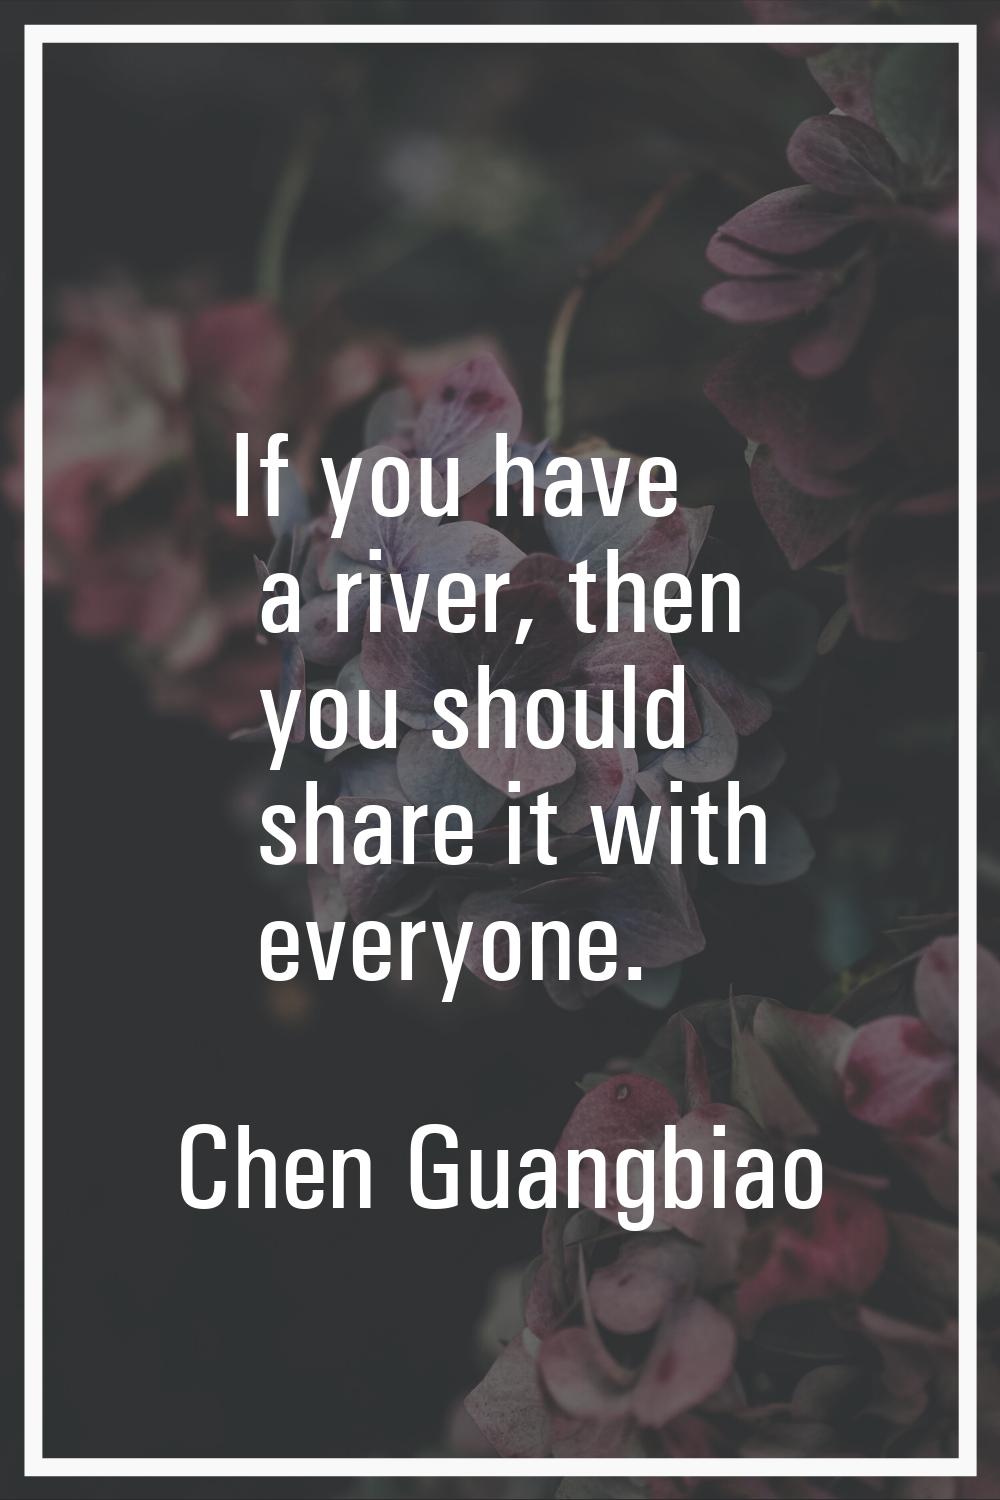 If you have a river, then you should share it with everyone.